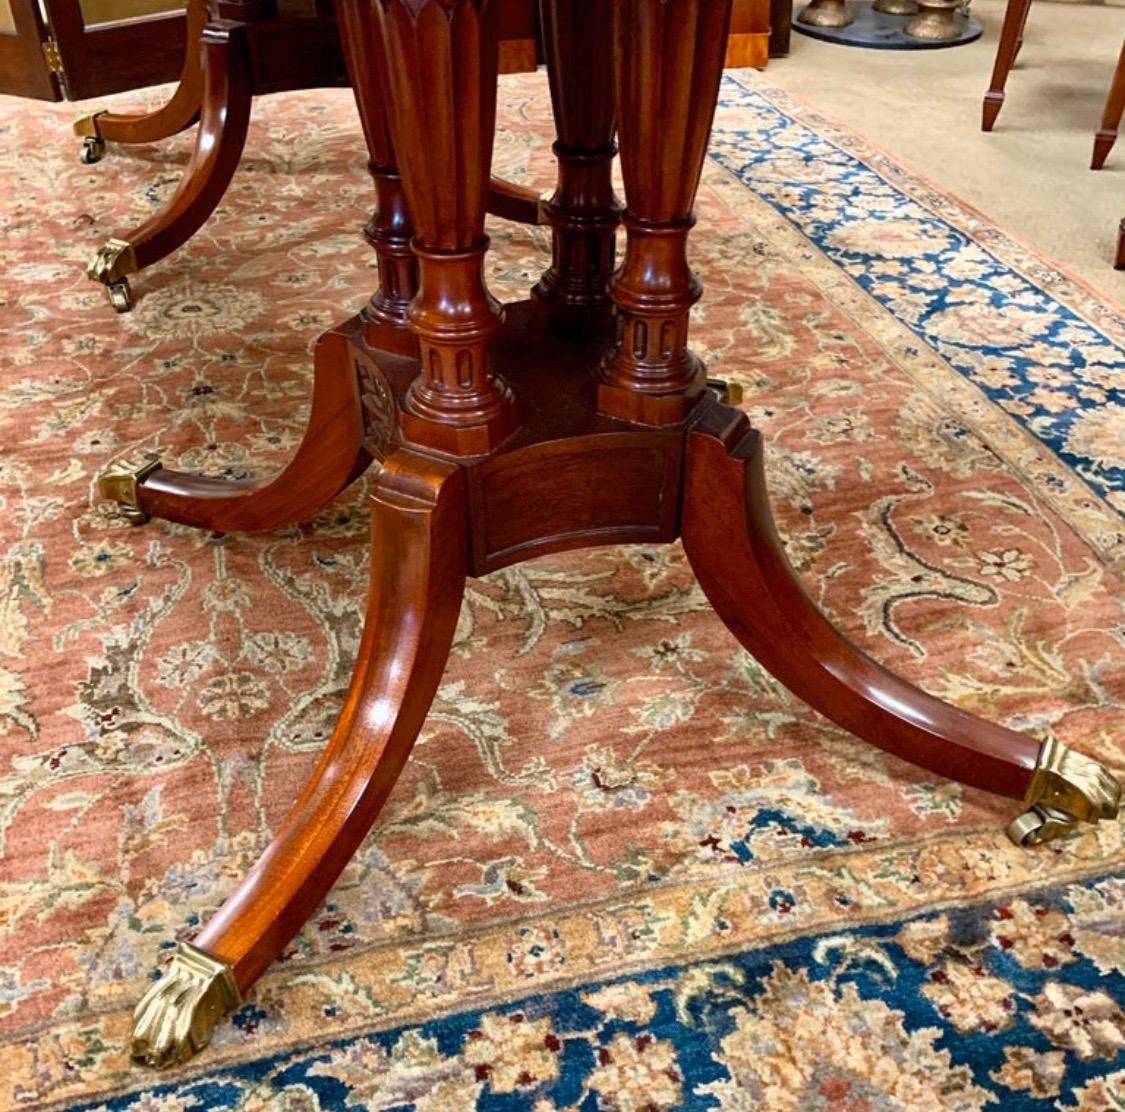 Stunning elegant Baker Furniture dining room set includes a double pedestal mahogany table with one leaf. Table features a banded inlay all around and brass paw feet. All Baker Furniture hallmarks are present.
The table expands from 70 inches to 88